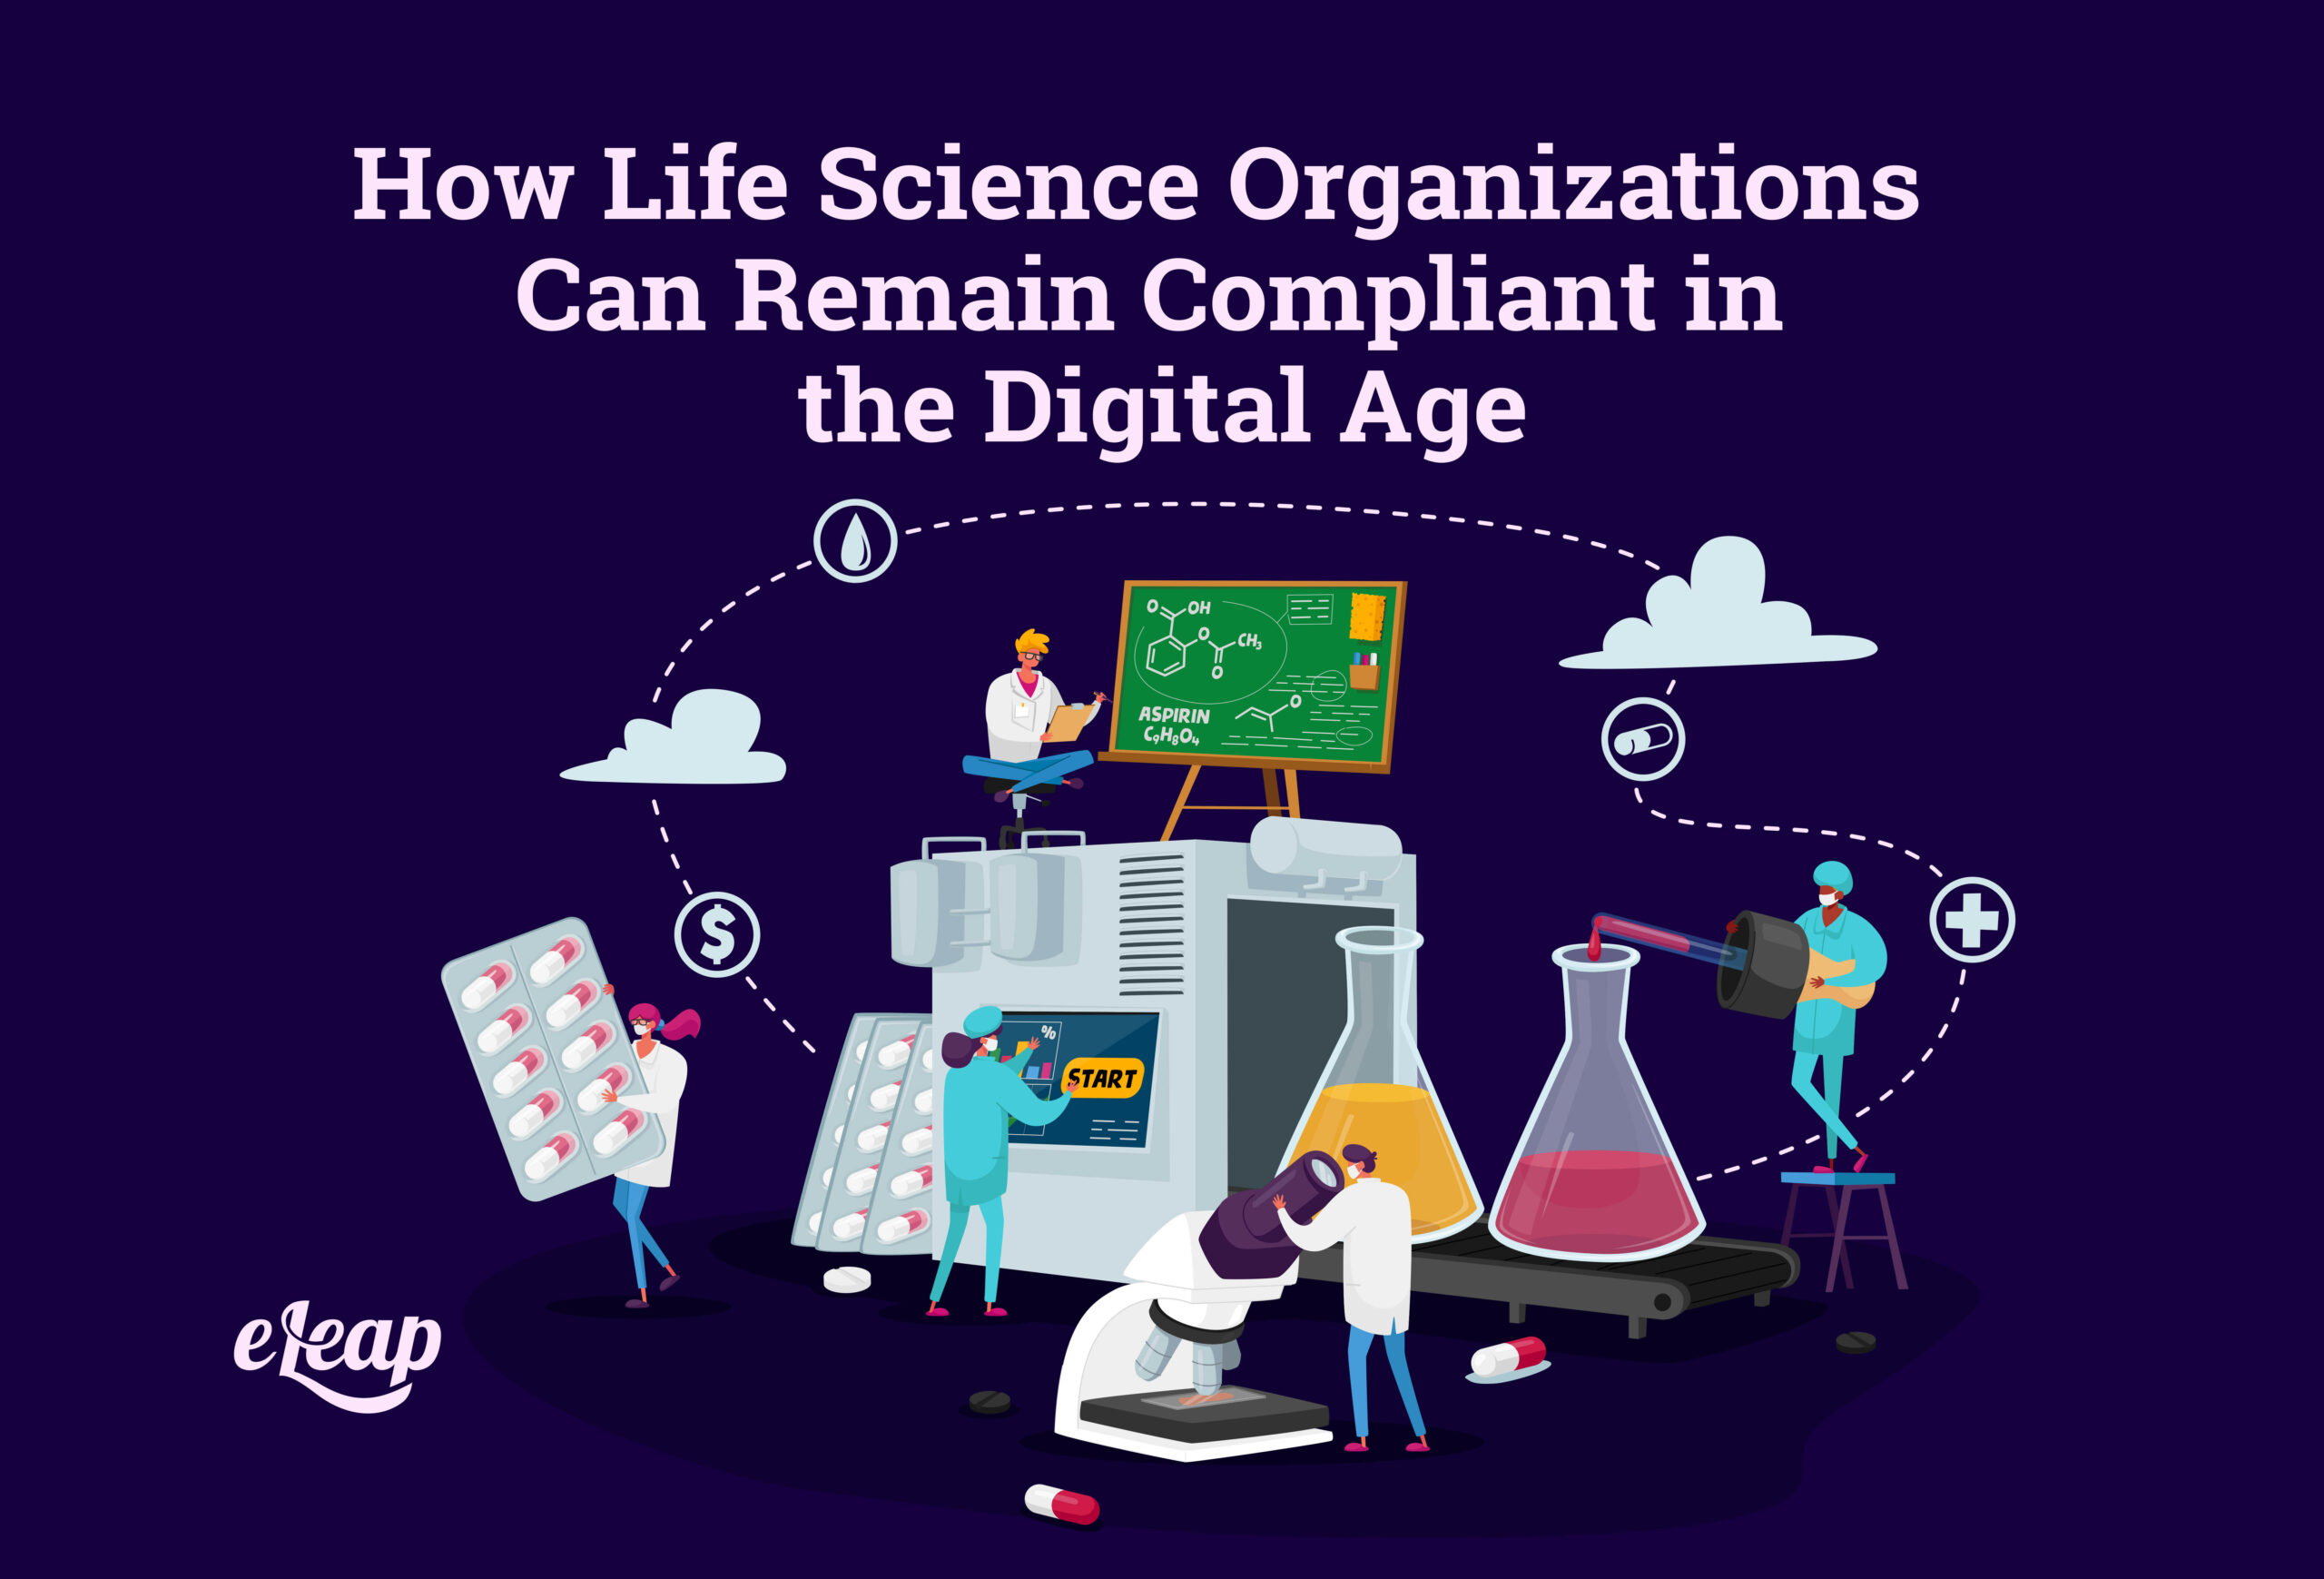 How Life Science Organizations Can Remain Compliant in the Digital Age